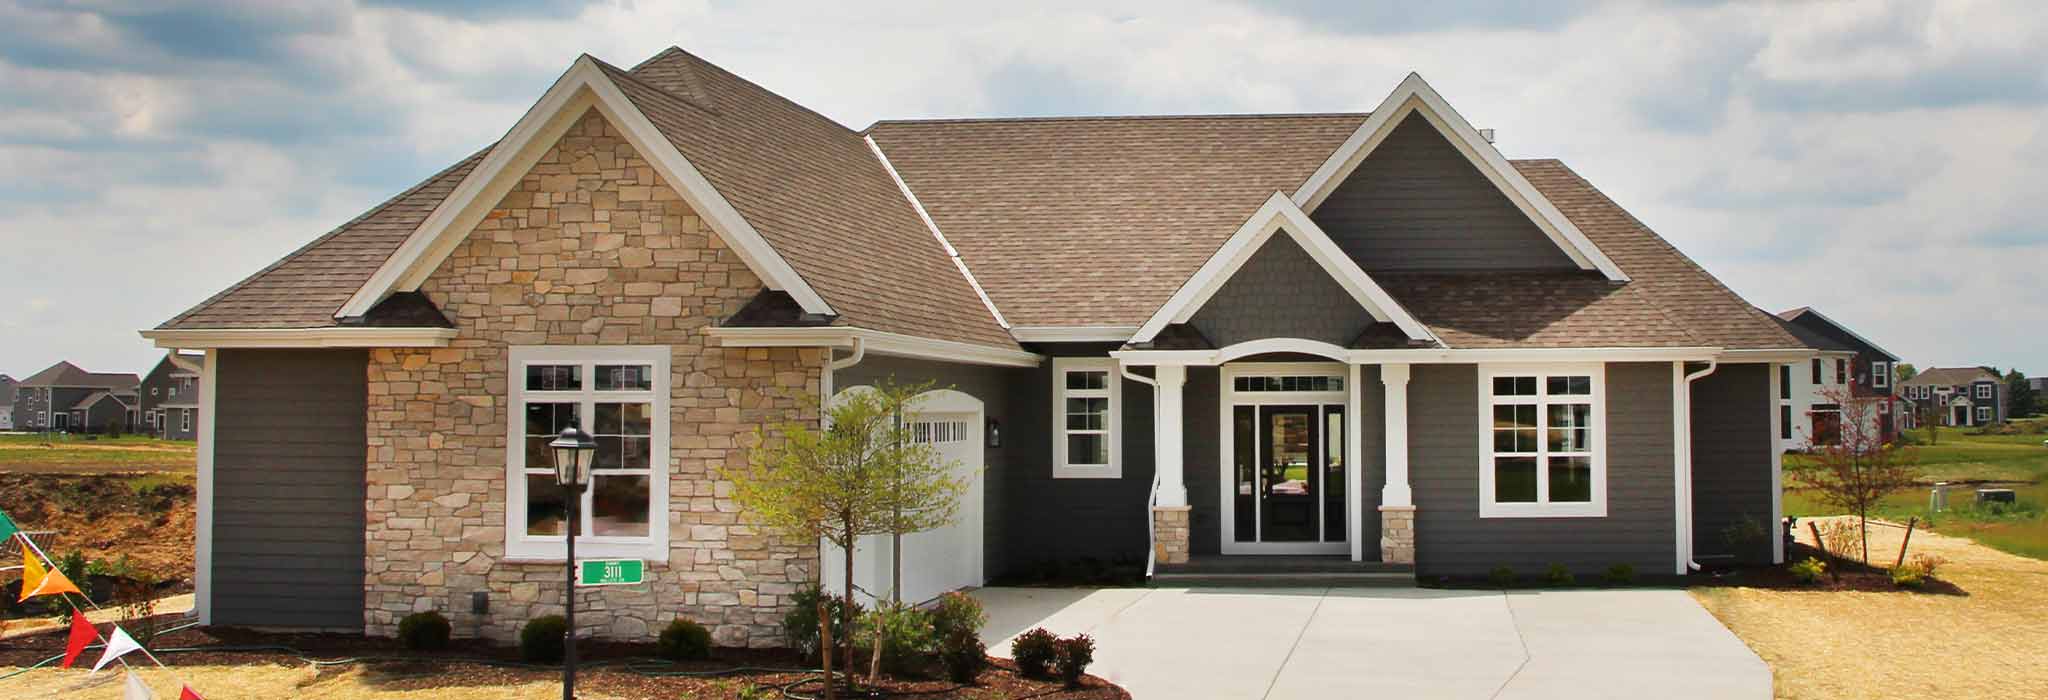 The Brittany Front Exterior by Demlang Builders